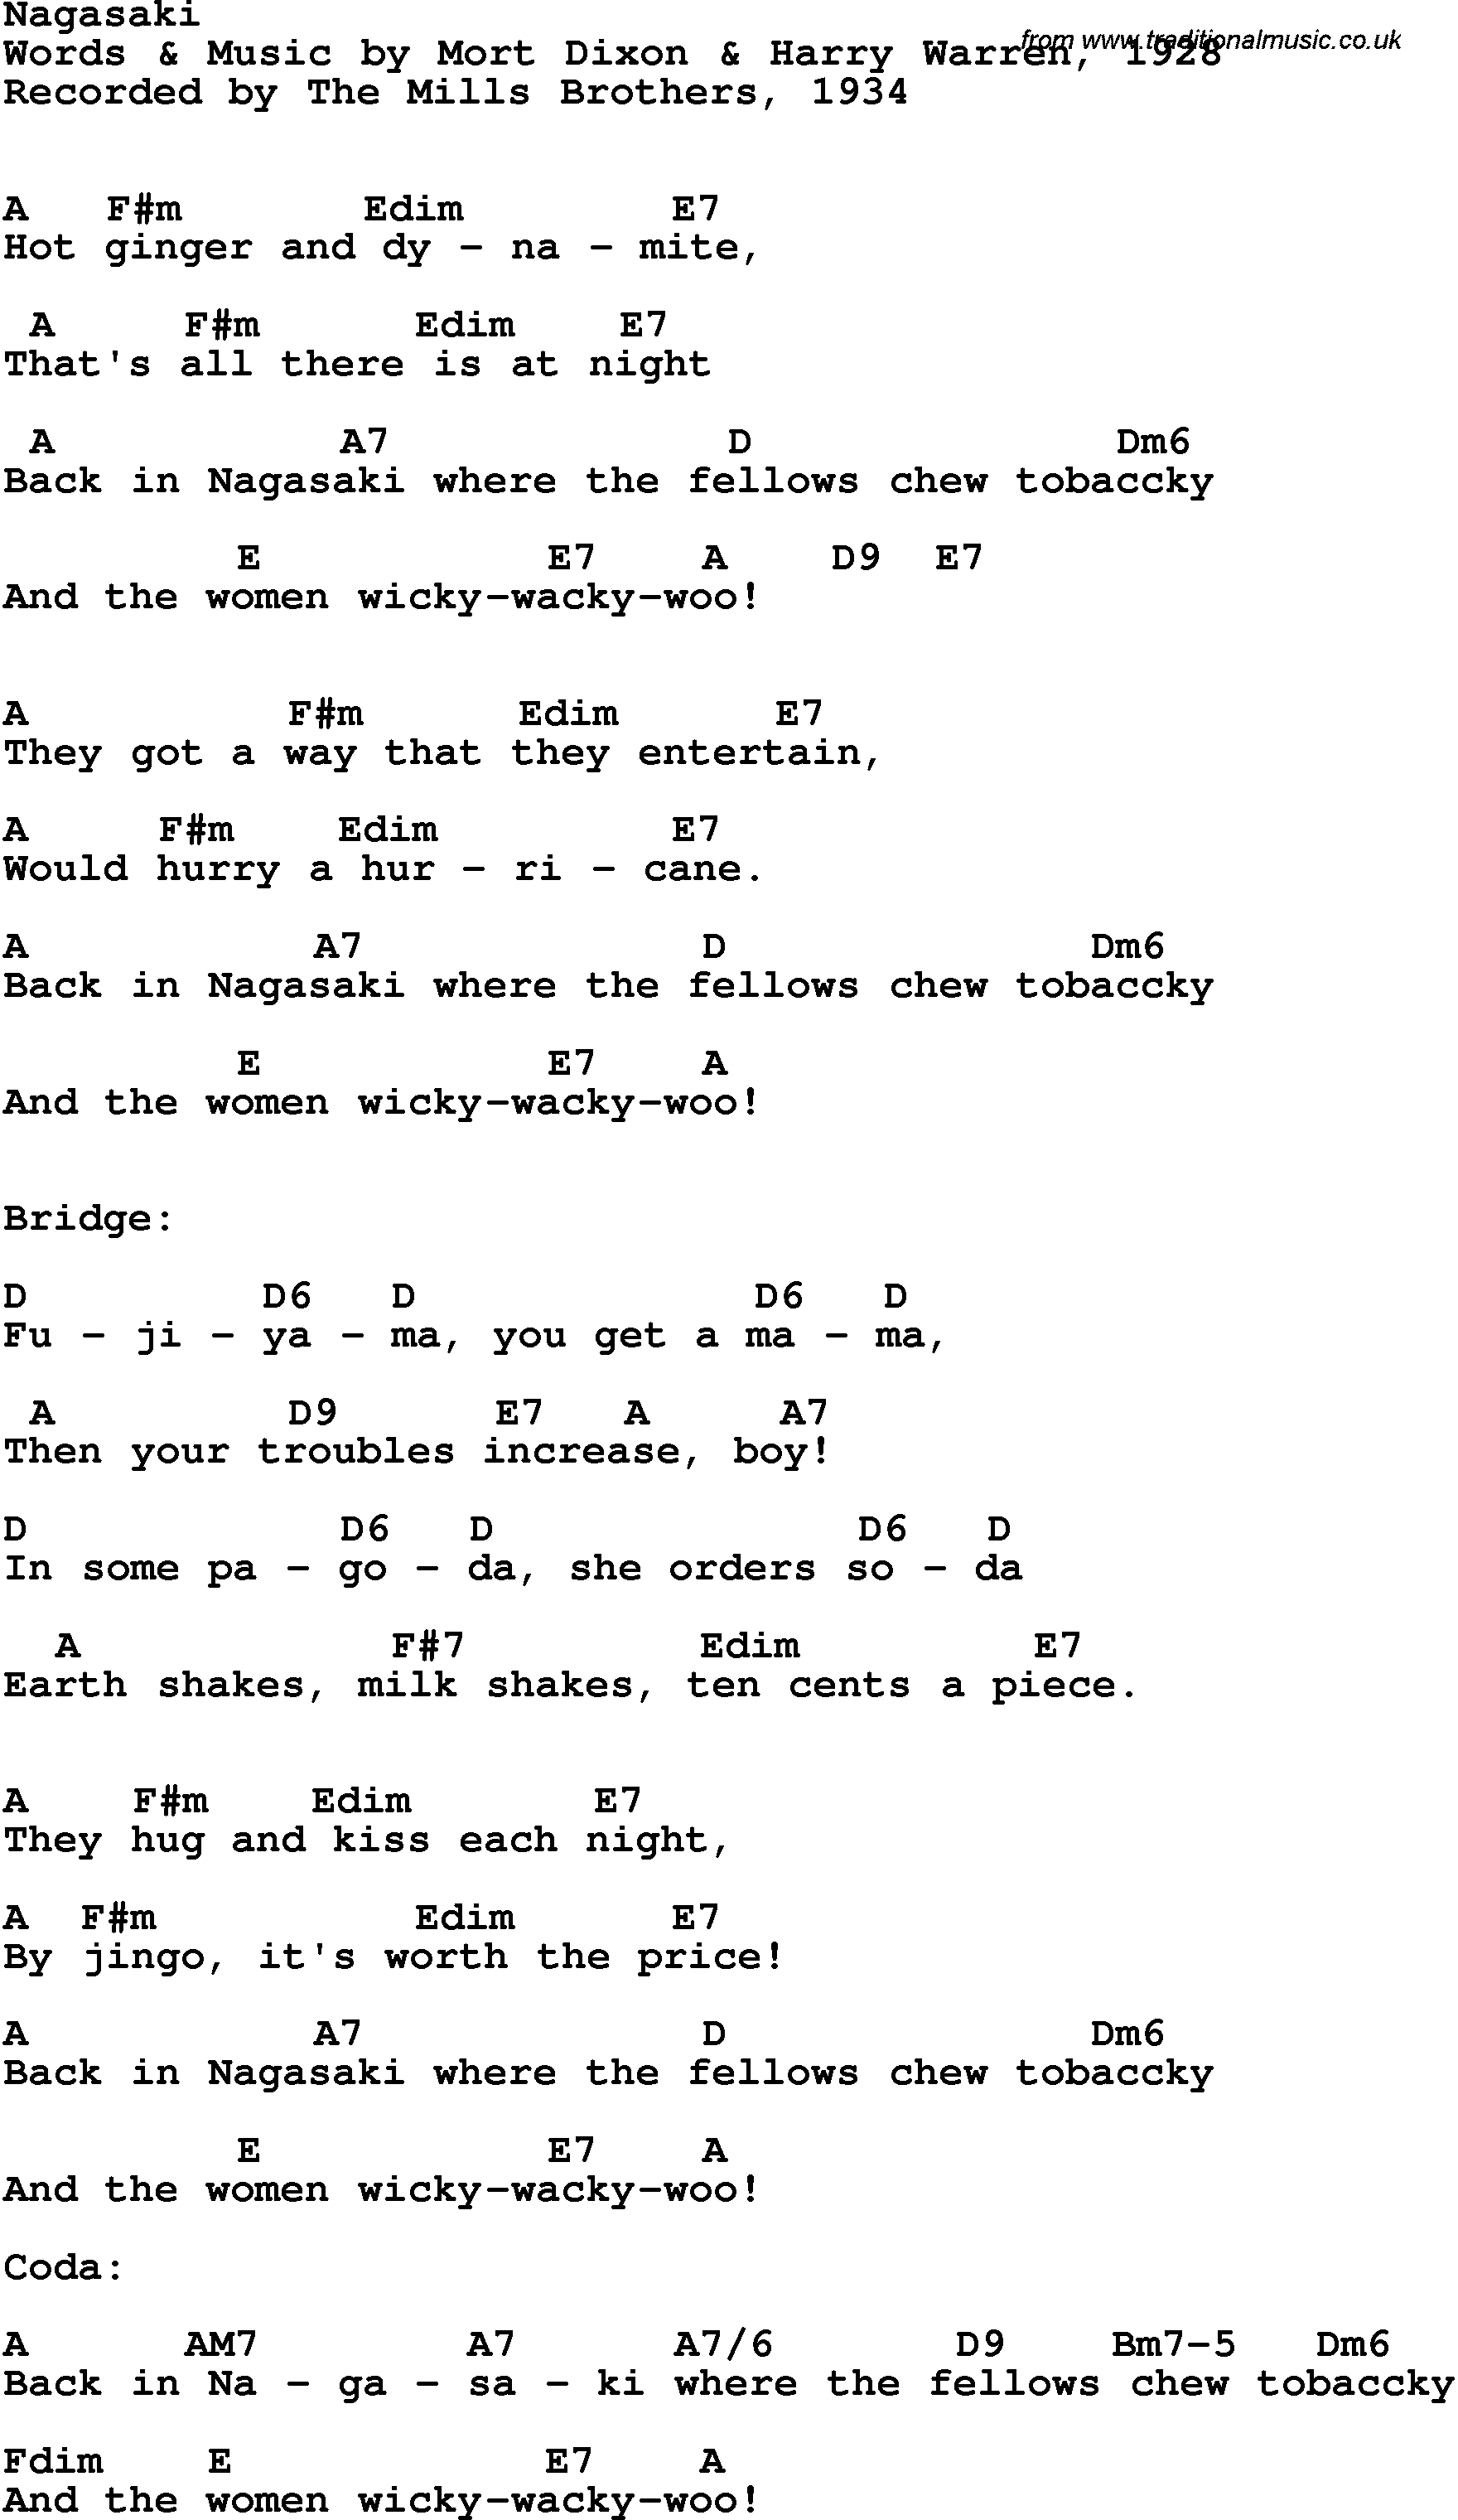 Song Lyrics with guitar chords for Nagasaki - The Mills Brothers, 1934